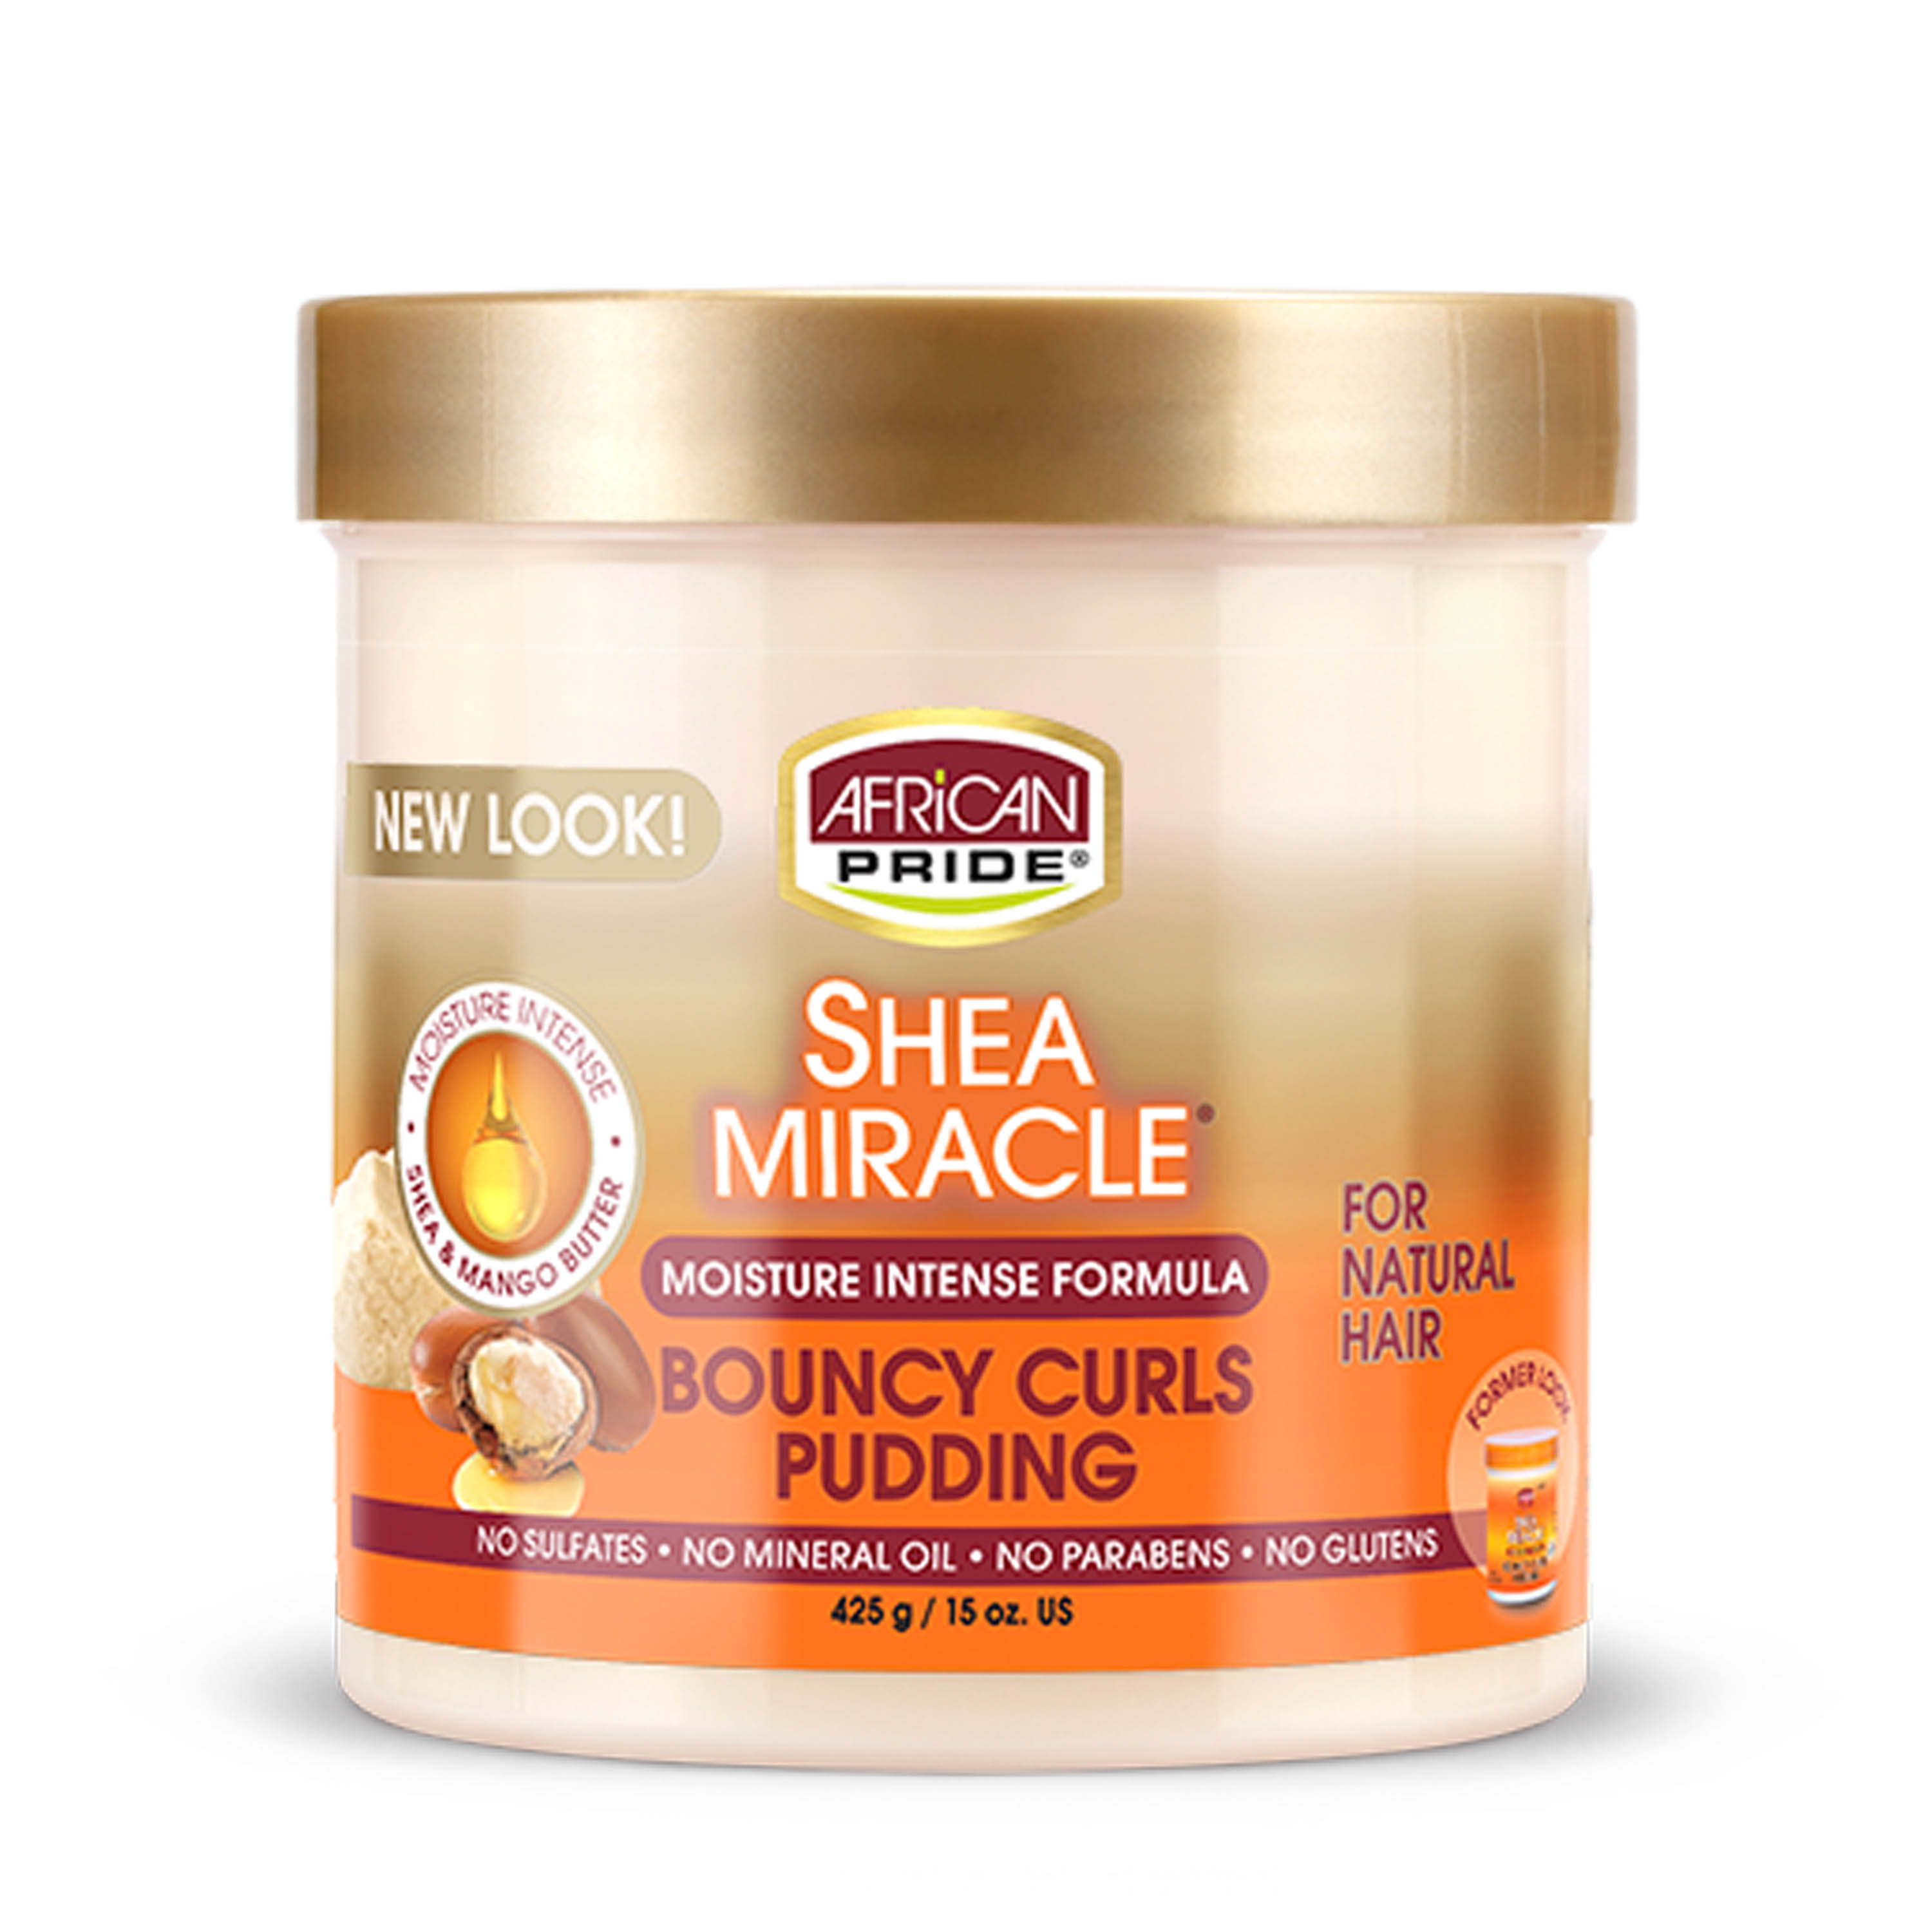 African Pride Shea Butter Miracle Bouncy Curls Pudding 15 oz. Jar, Curly Hair, Moisturizing - image 1 of 7